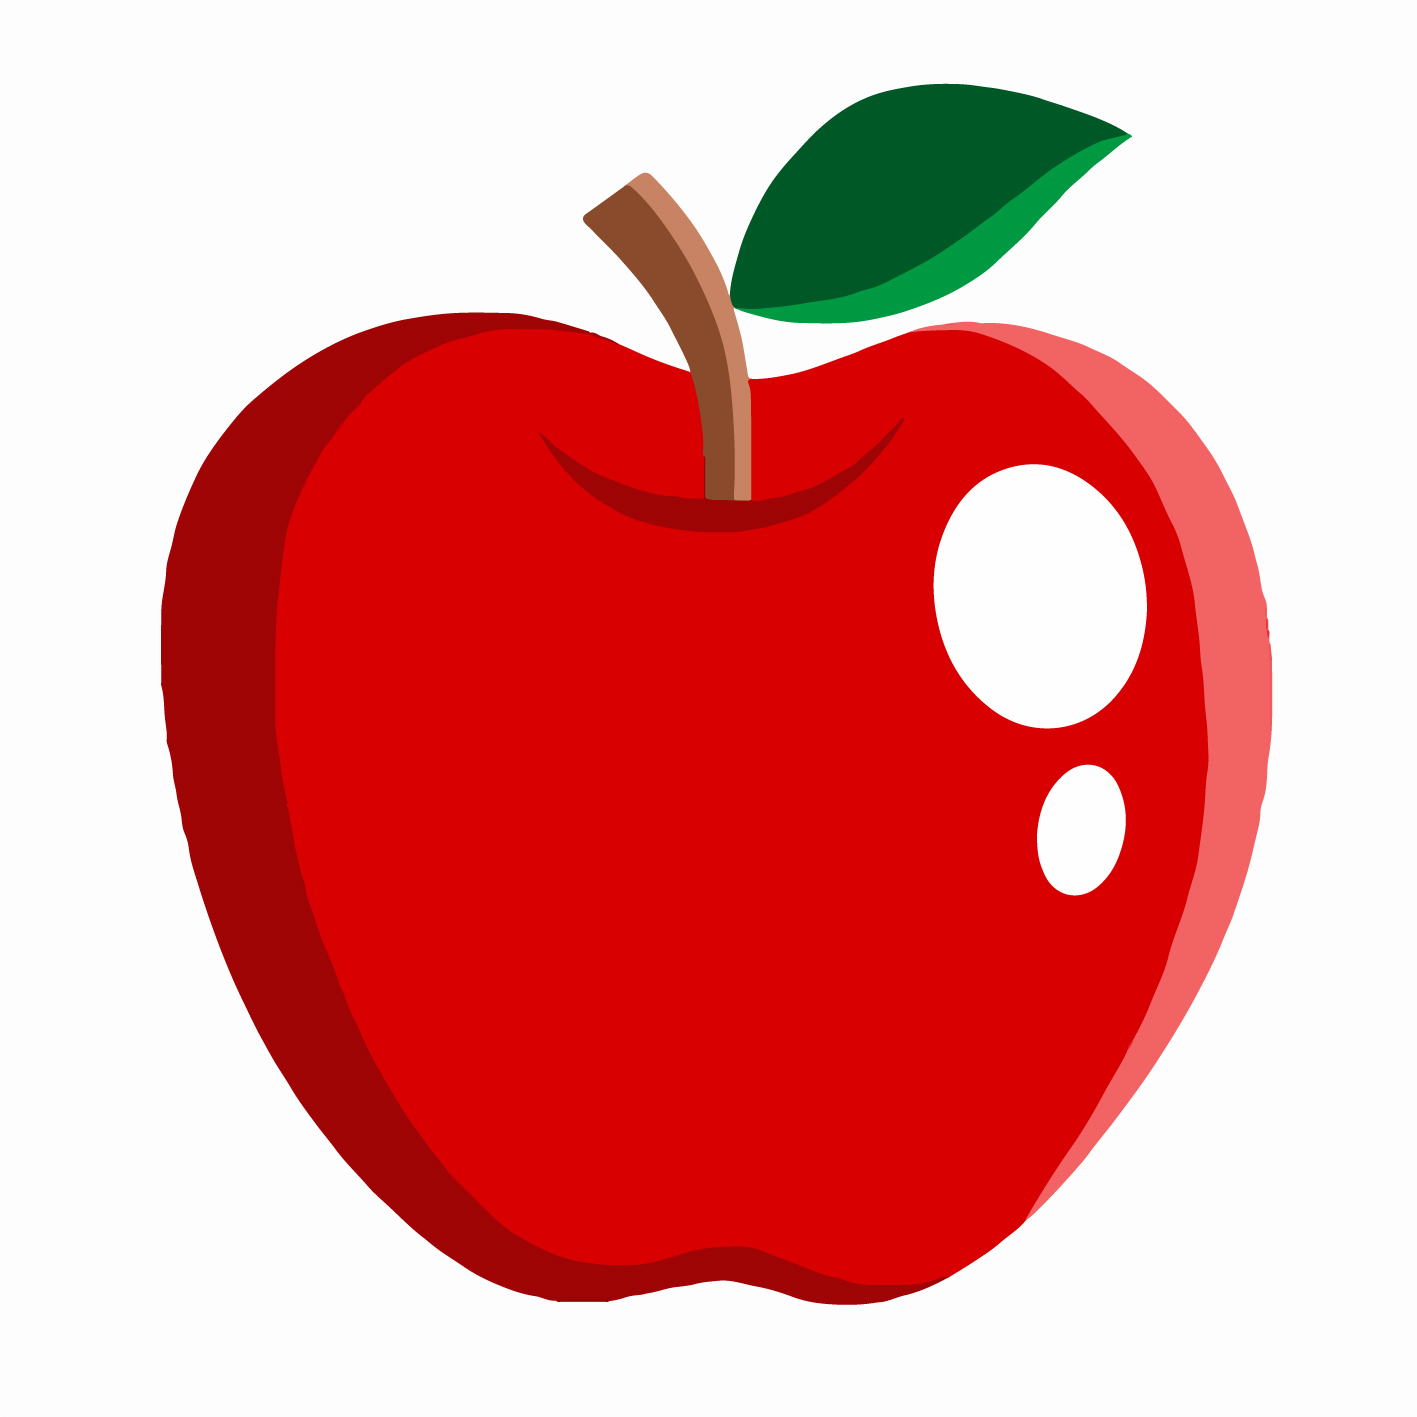 Apple free clipart illustration picture